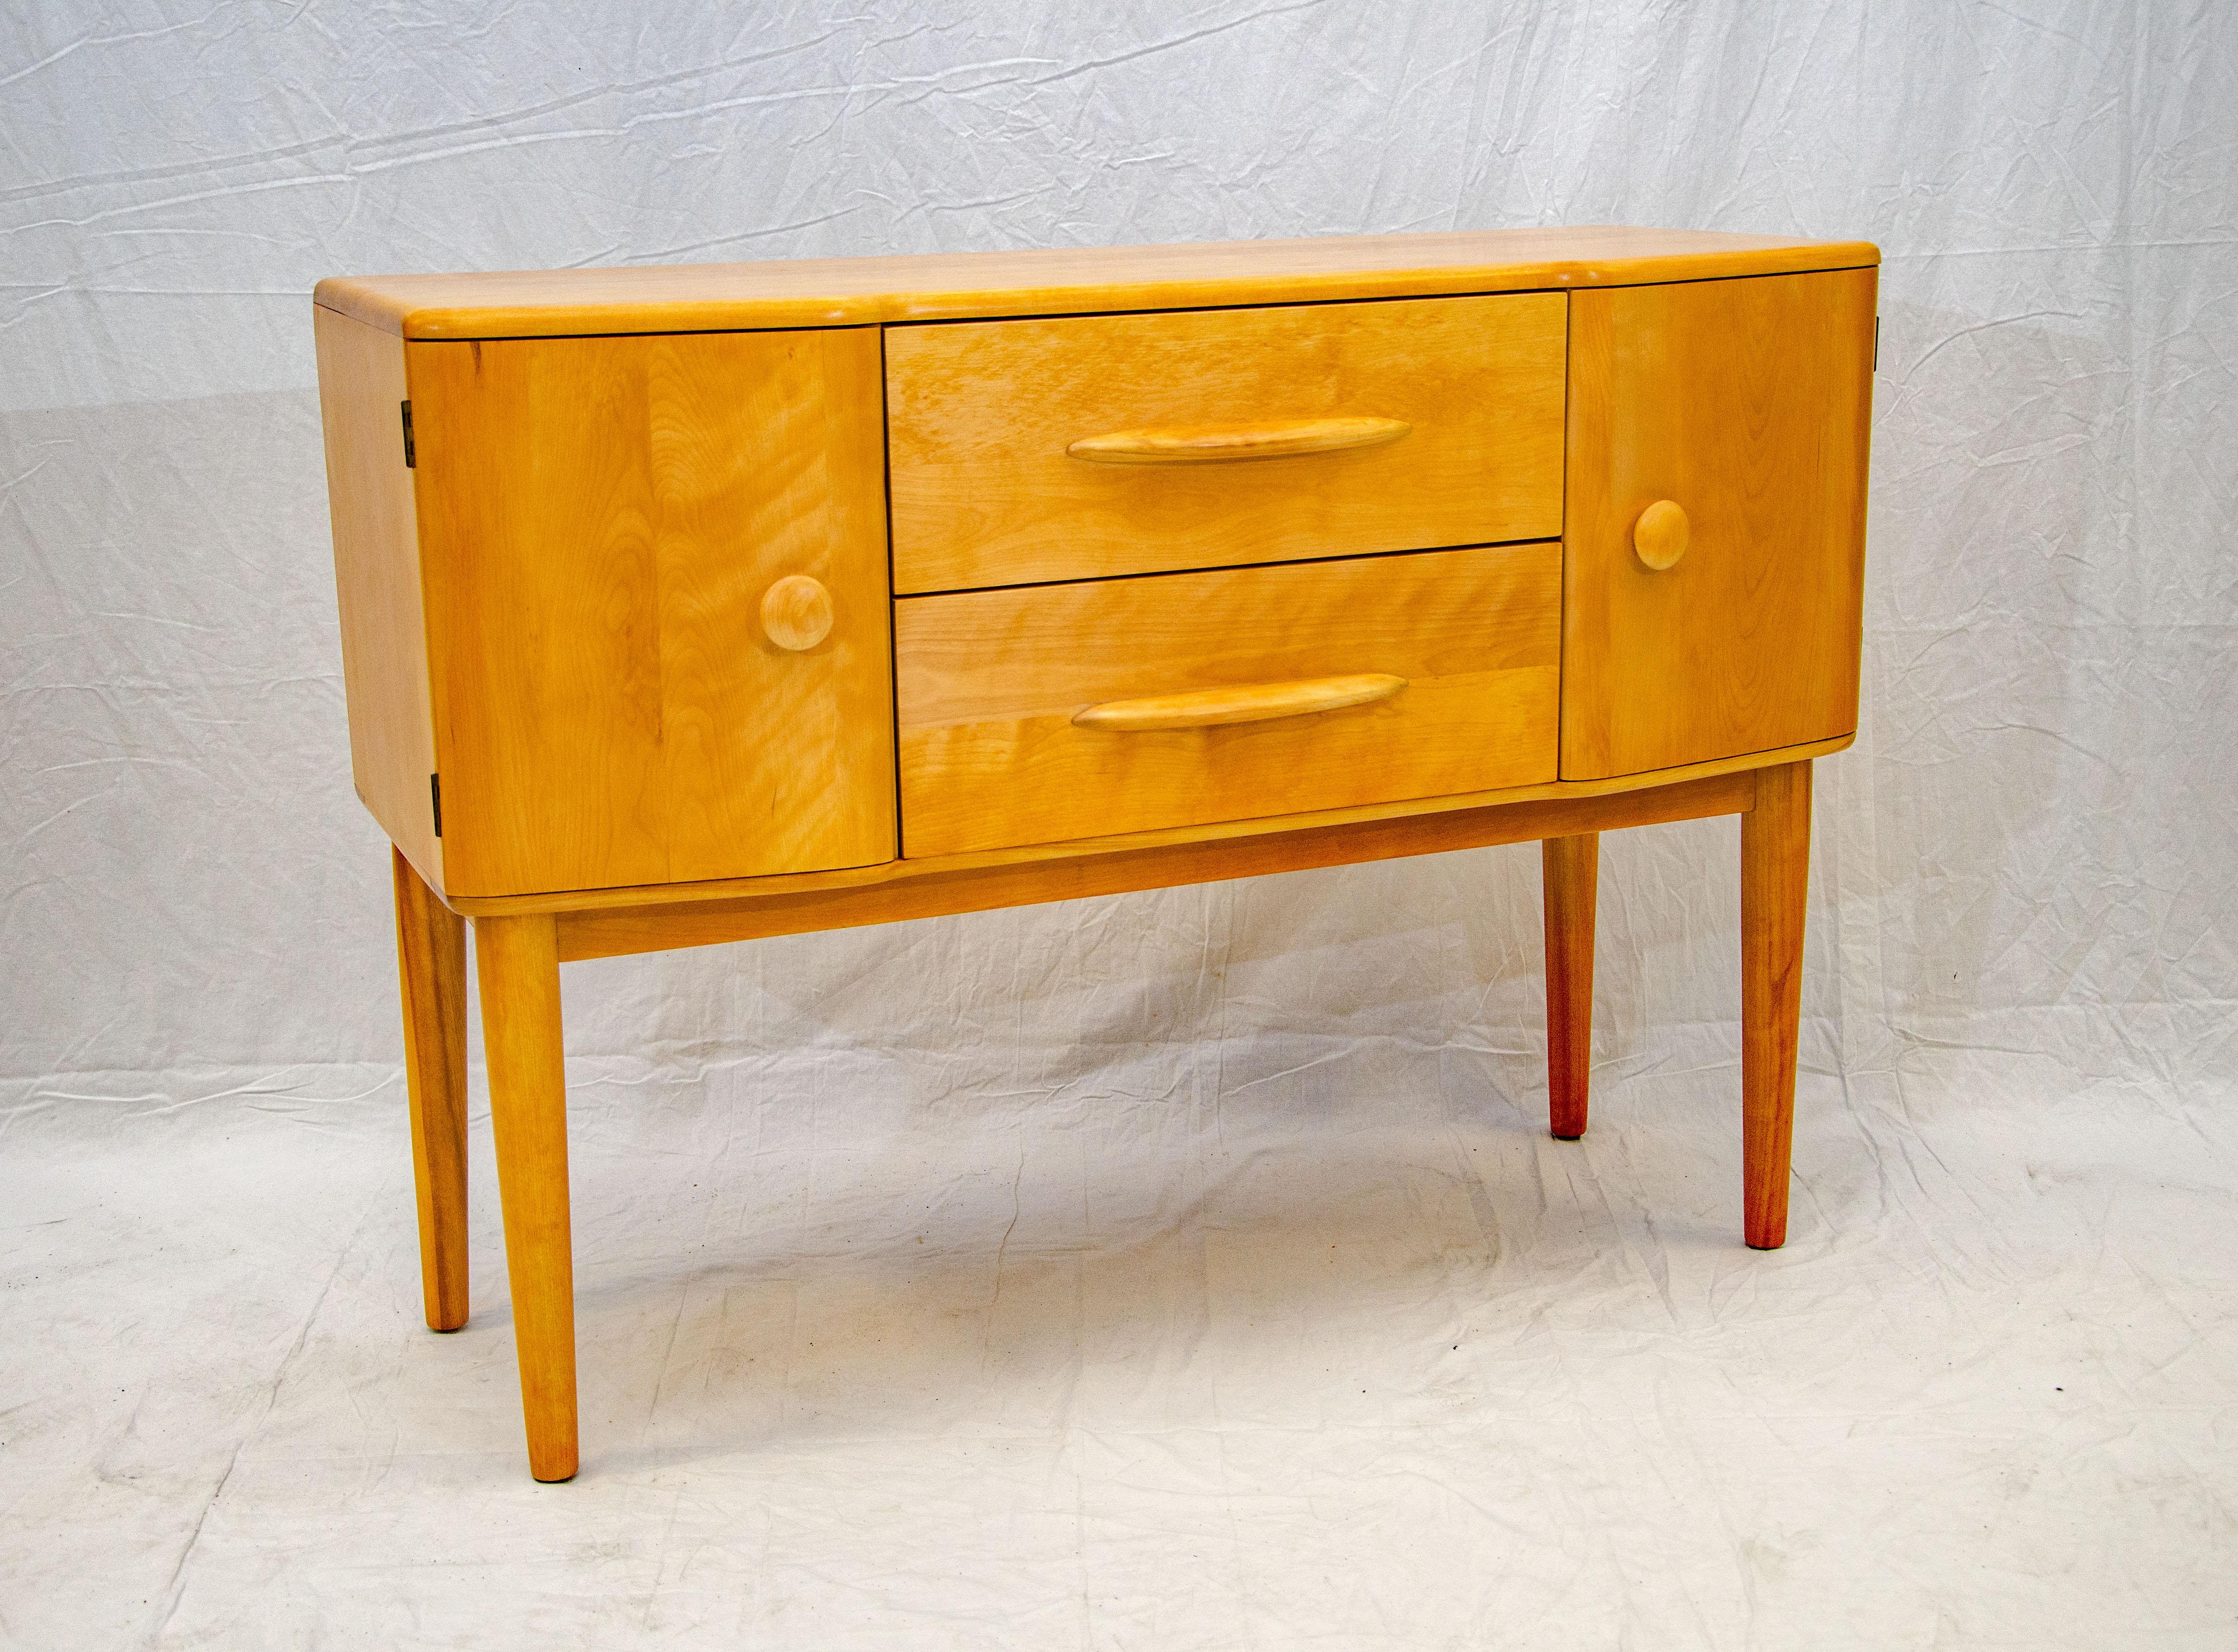 Hard to find Heywood Wakefield server on tall legs. The doors are at a slight angle and the two drawers are slightly recessed. The deep drawers provide ample storage space. This server was manufactured for only two years (1940-1942) and thus it is a